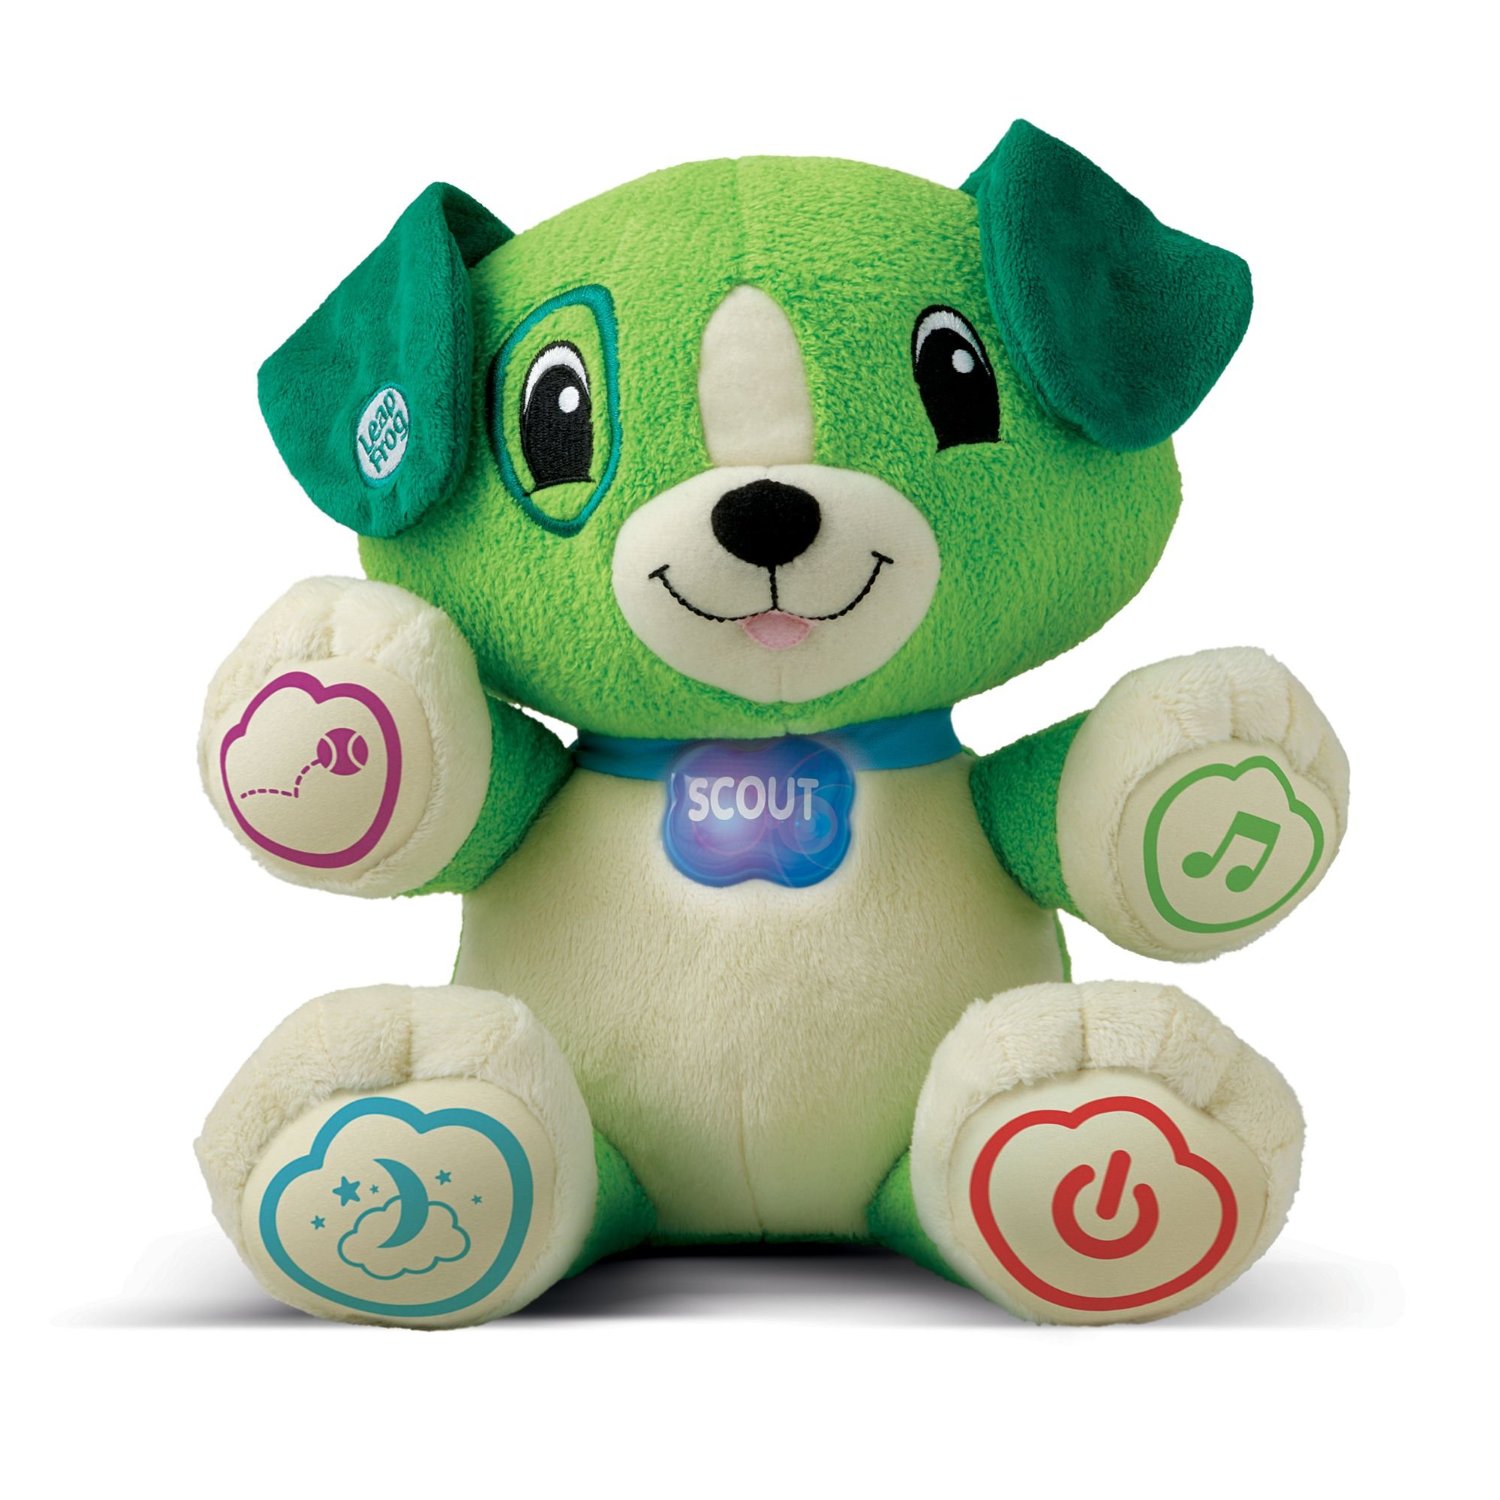 LeapFrog My Pal Scout Only $14.22 (Reg. $24.99)